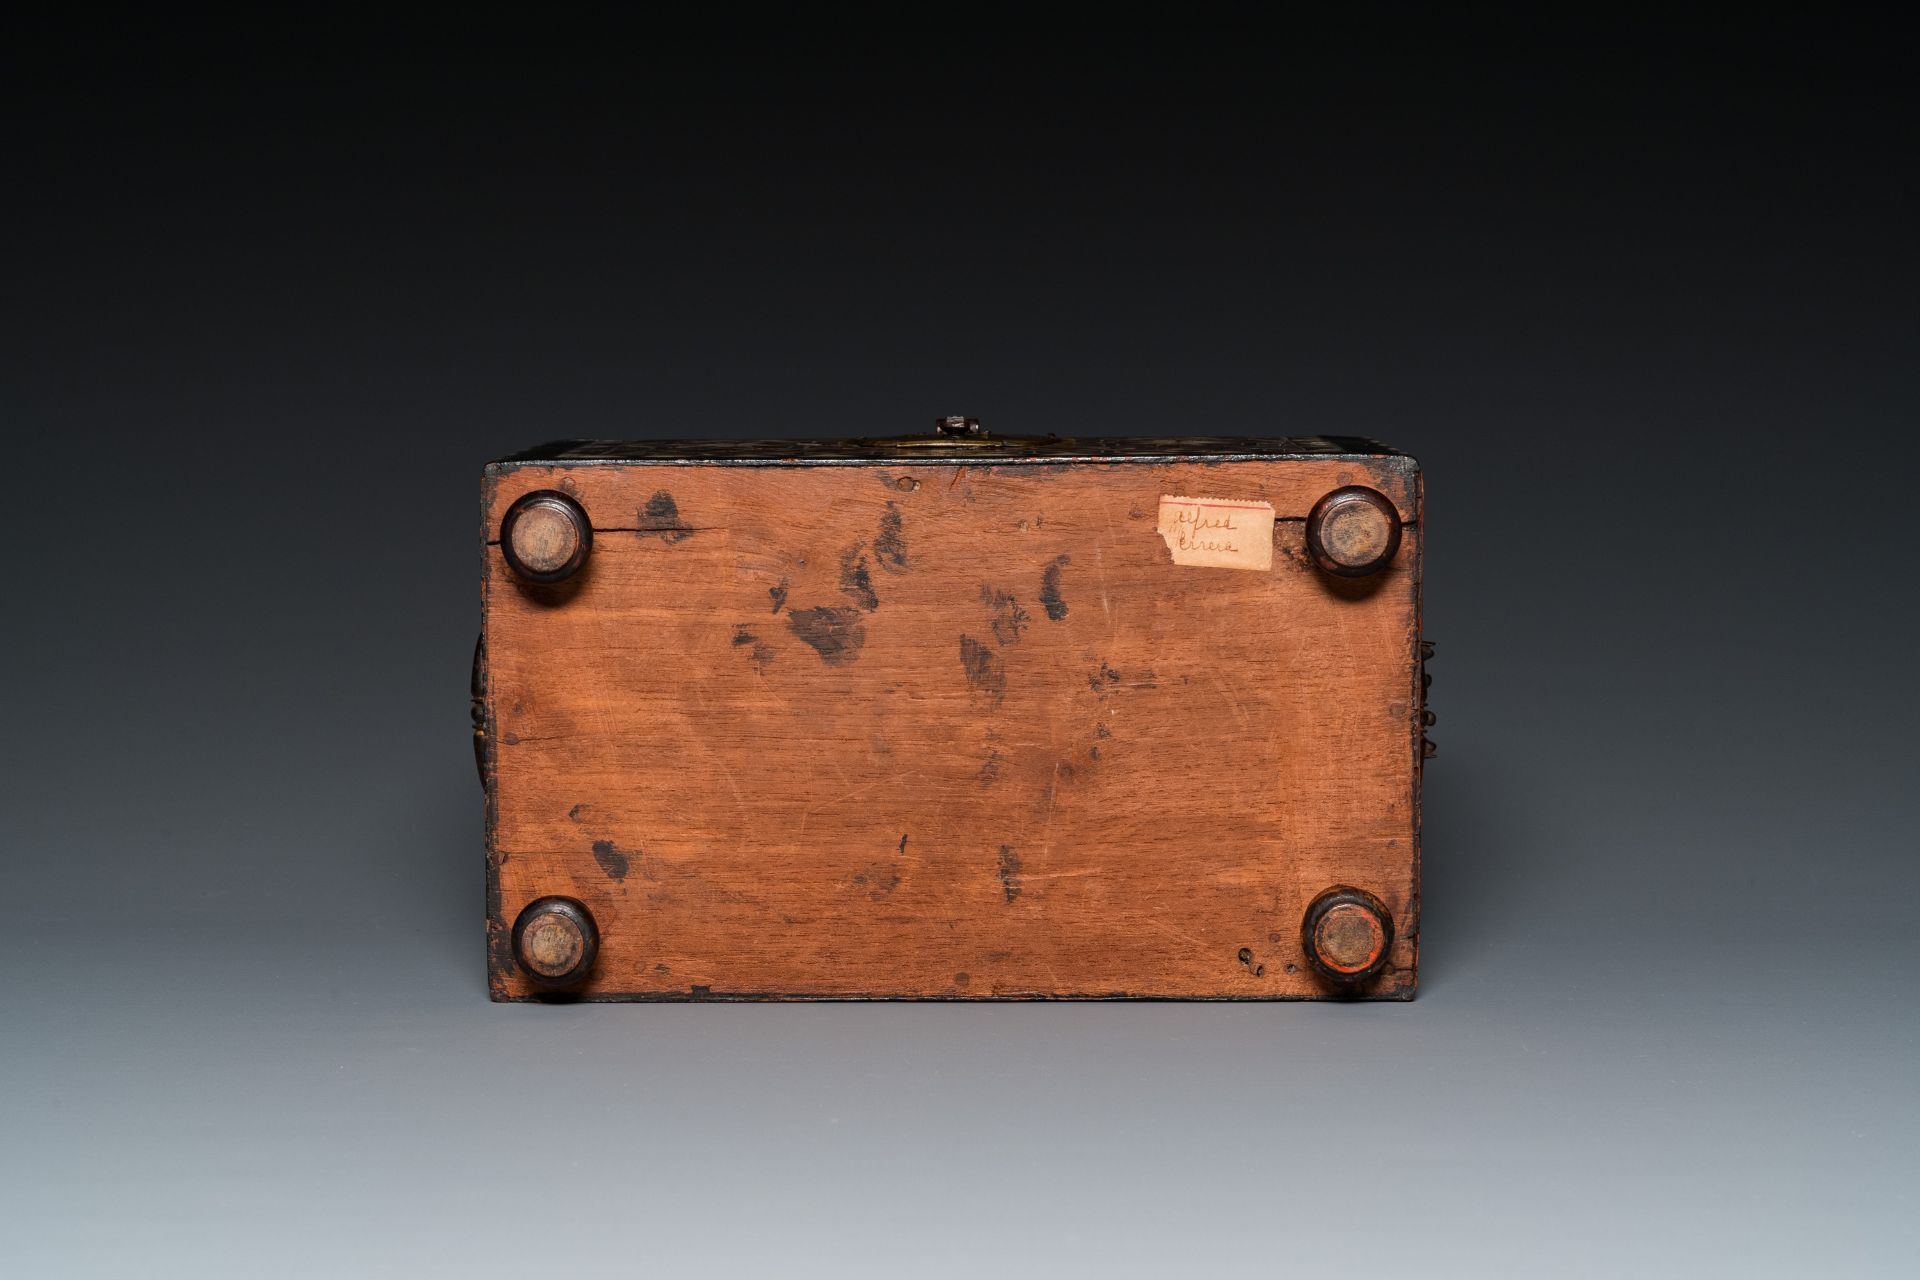 A tortoise-veneered and bone-inlaid wooden casket, probably Turkey, 17th C. - Image 6 of 8